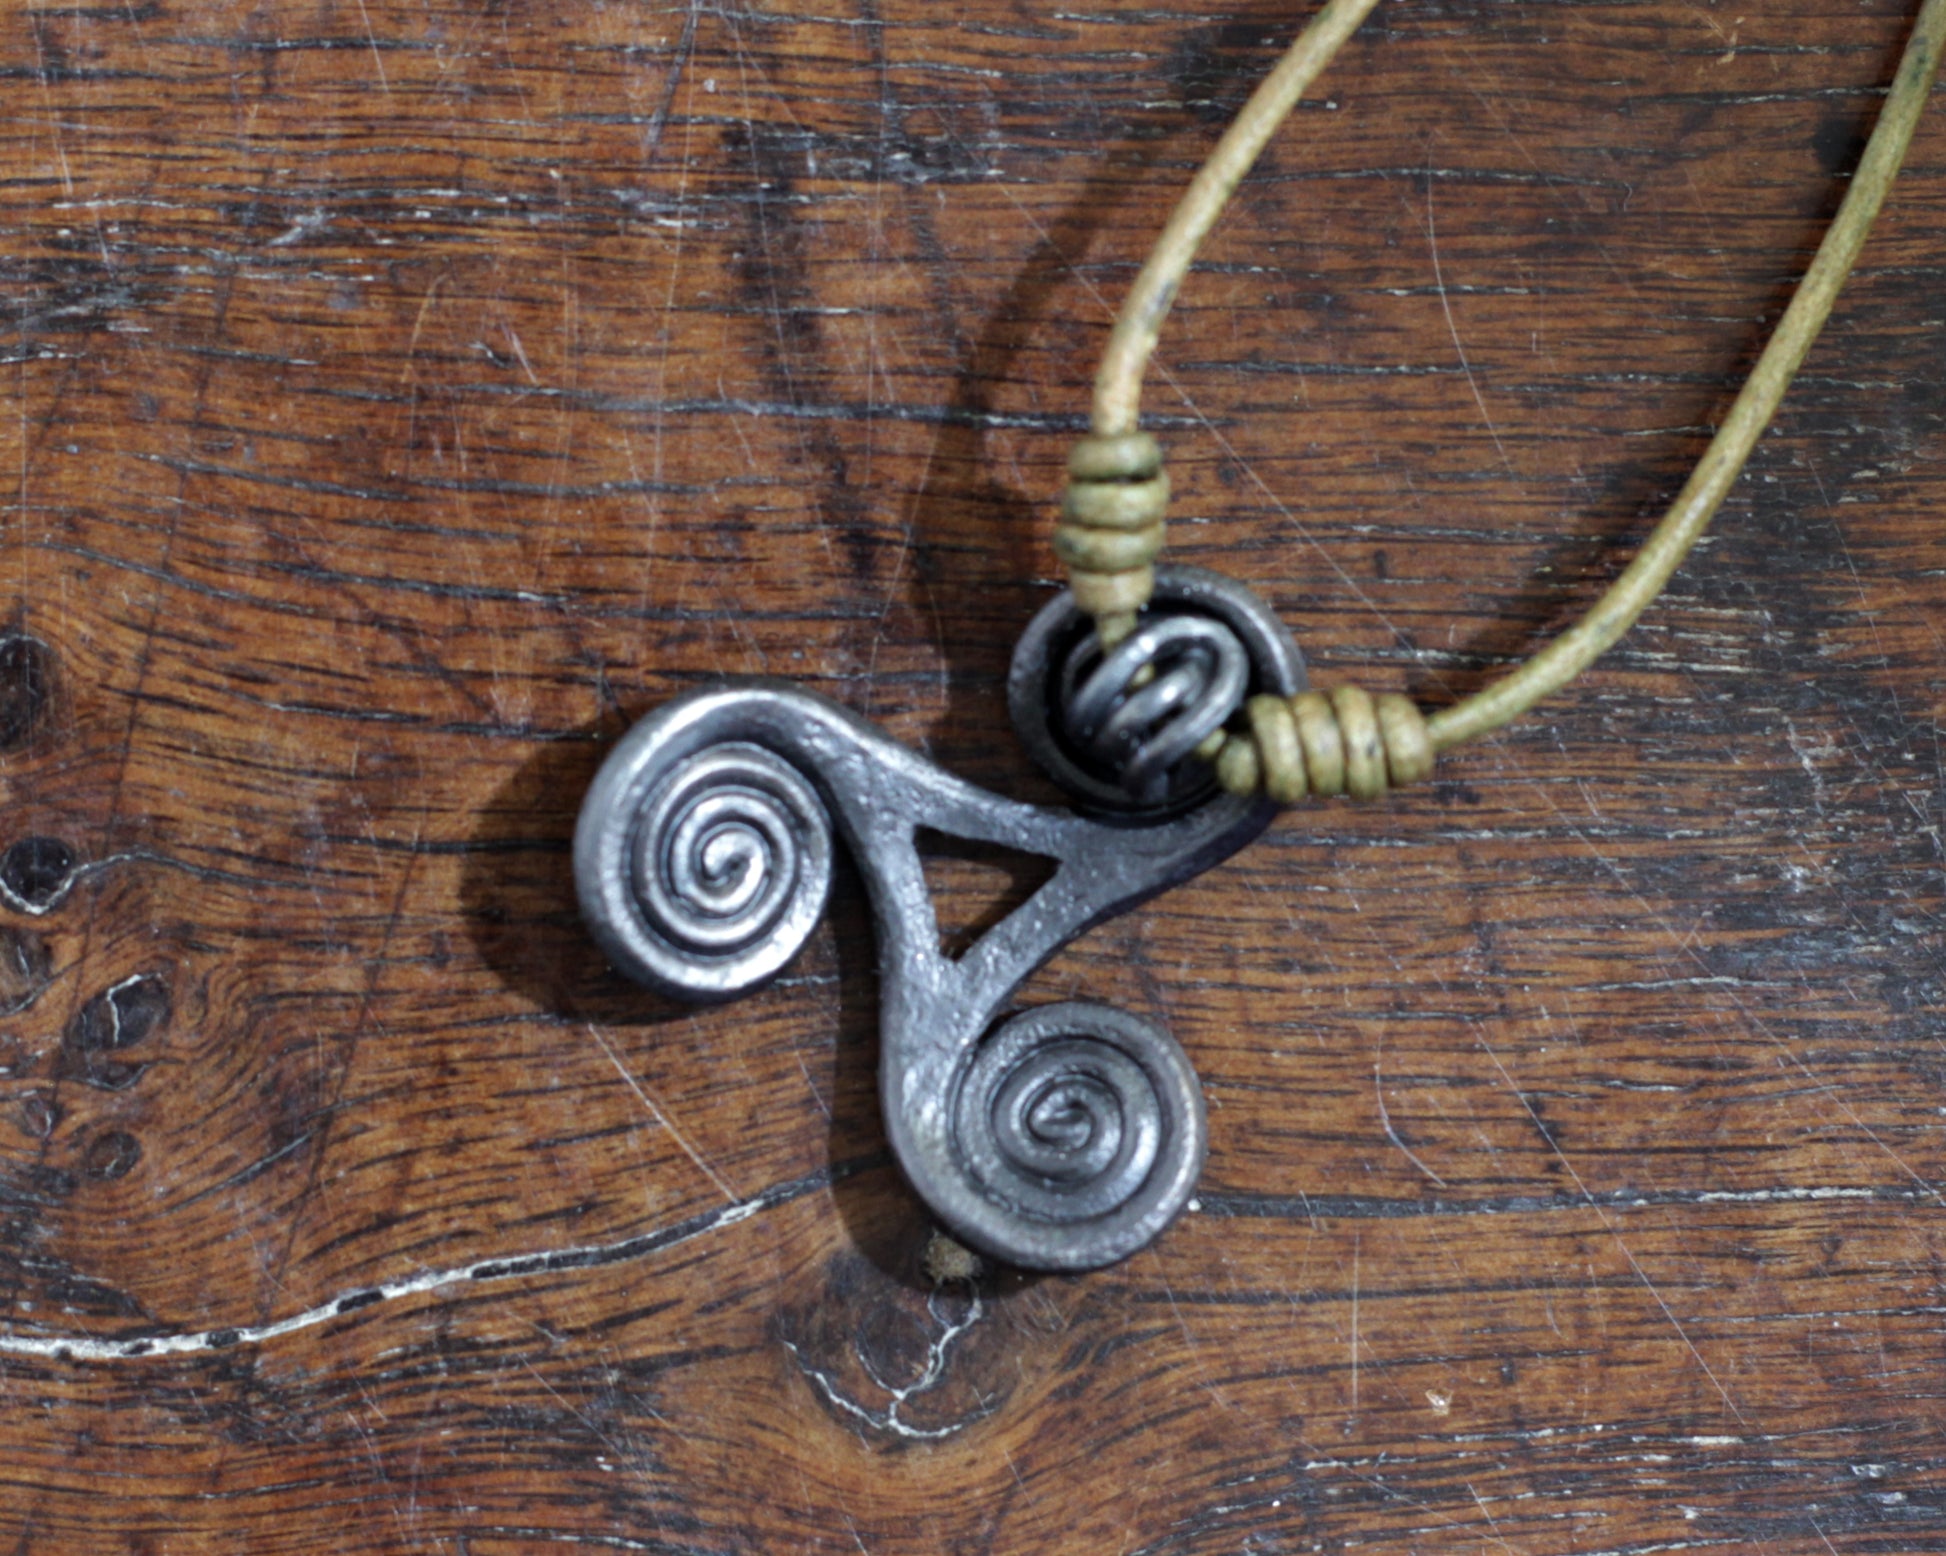 Hand Forged Iron Triskelion Necklace, designed and made by Blacksmith Marleena Barran from Taitaya Forge.  View from the back.